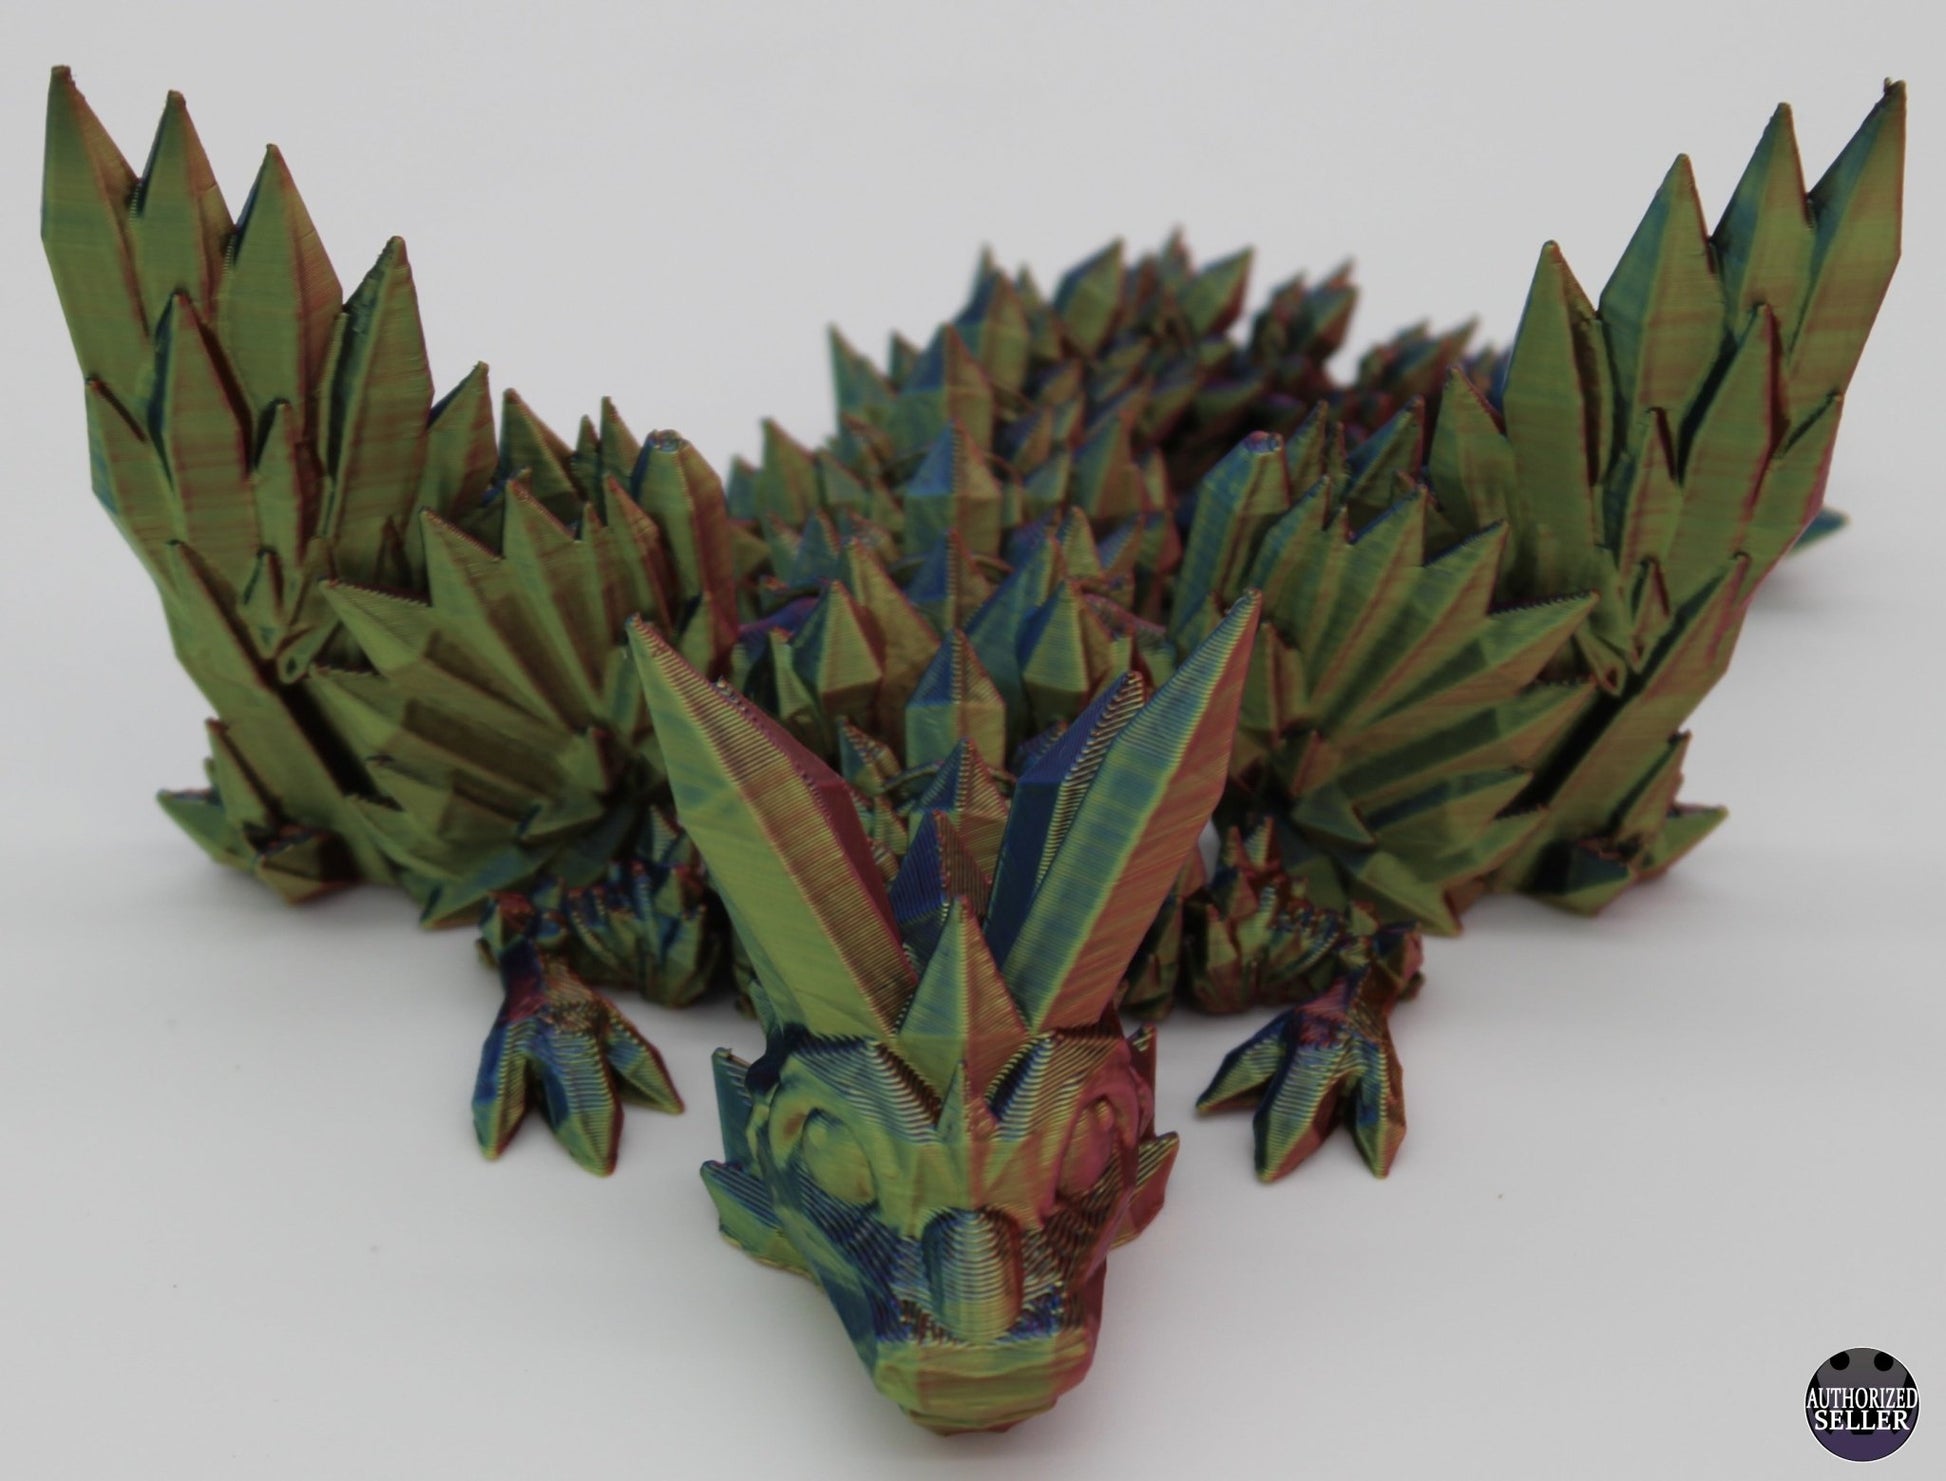 GIANT 3D Printed Crystal Dragon Articulated Fidget Desk Toy Gift